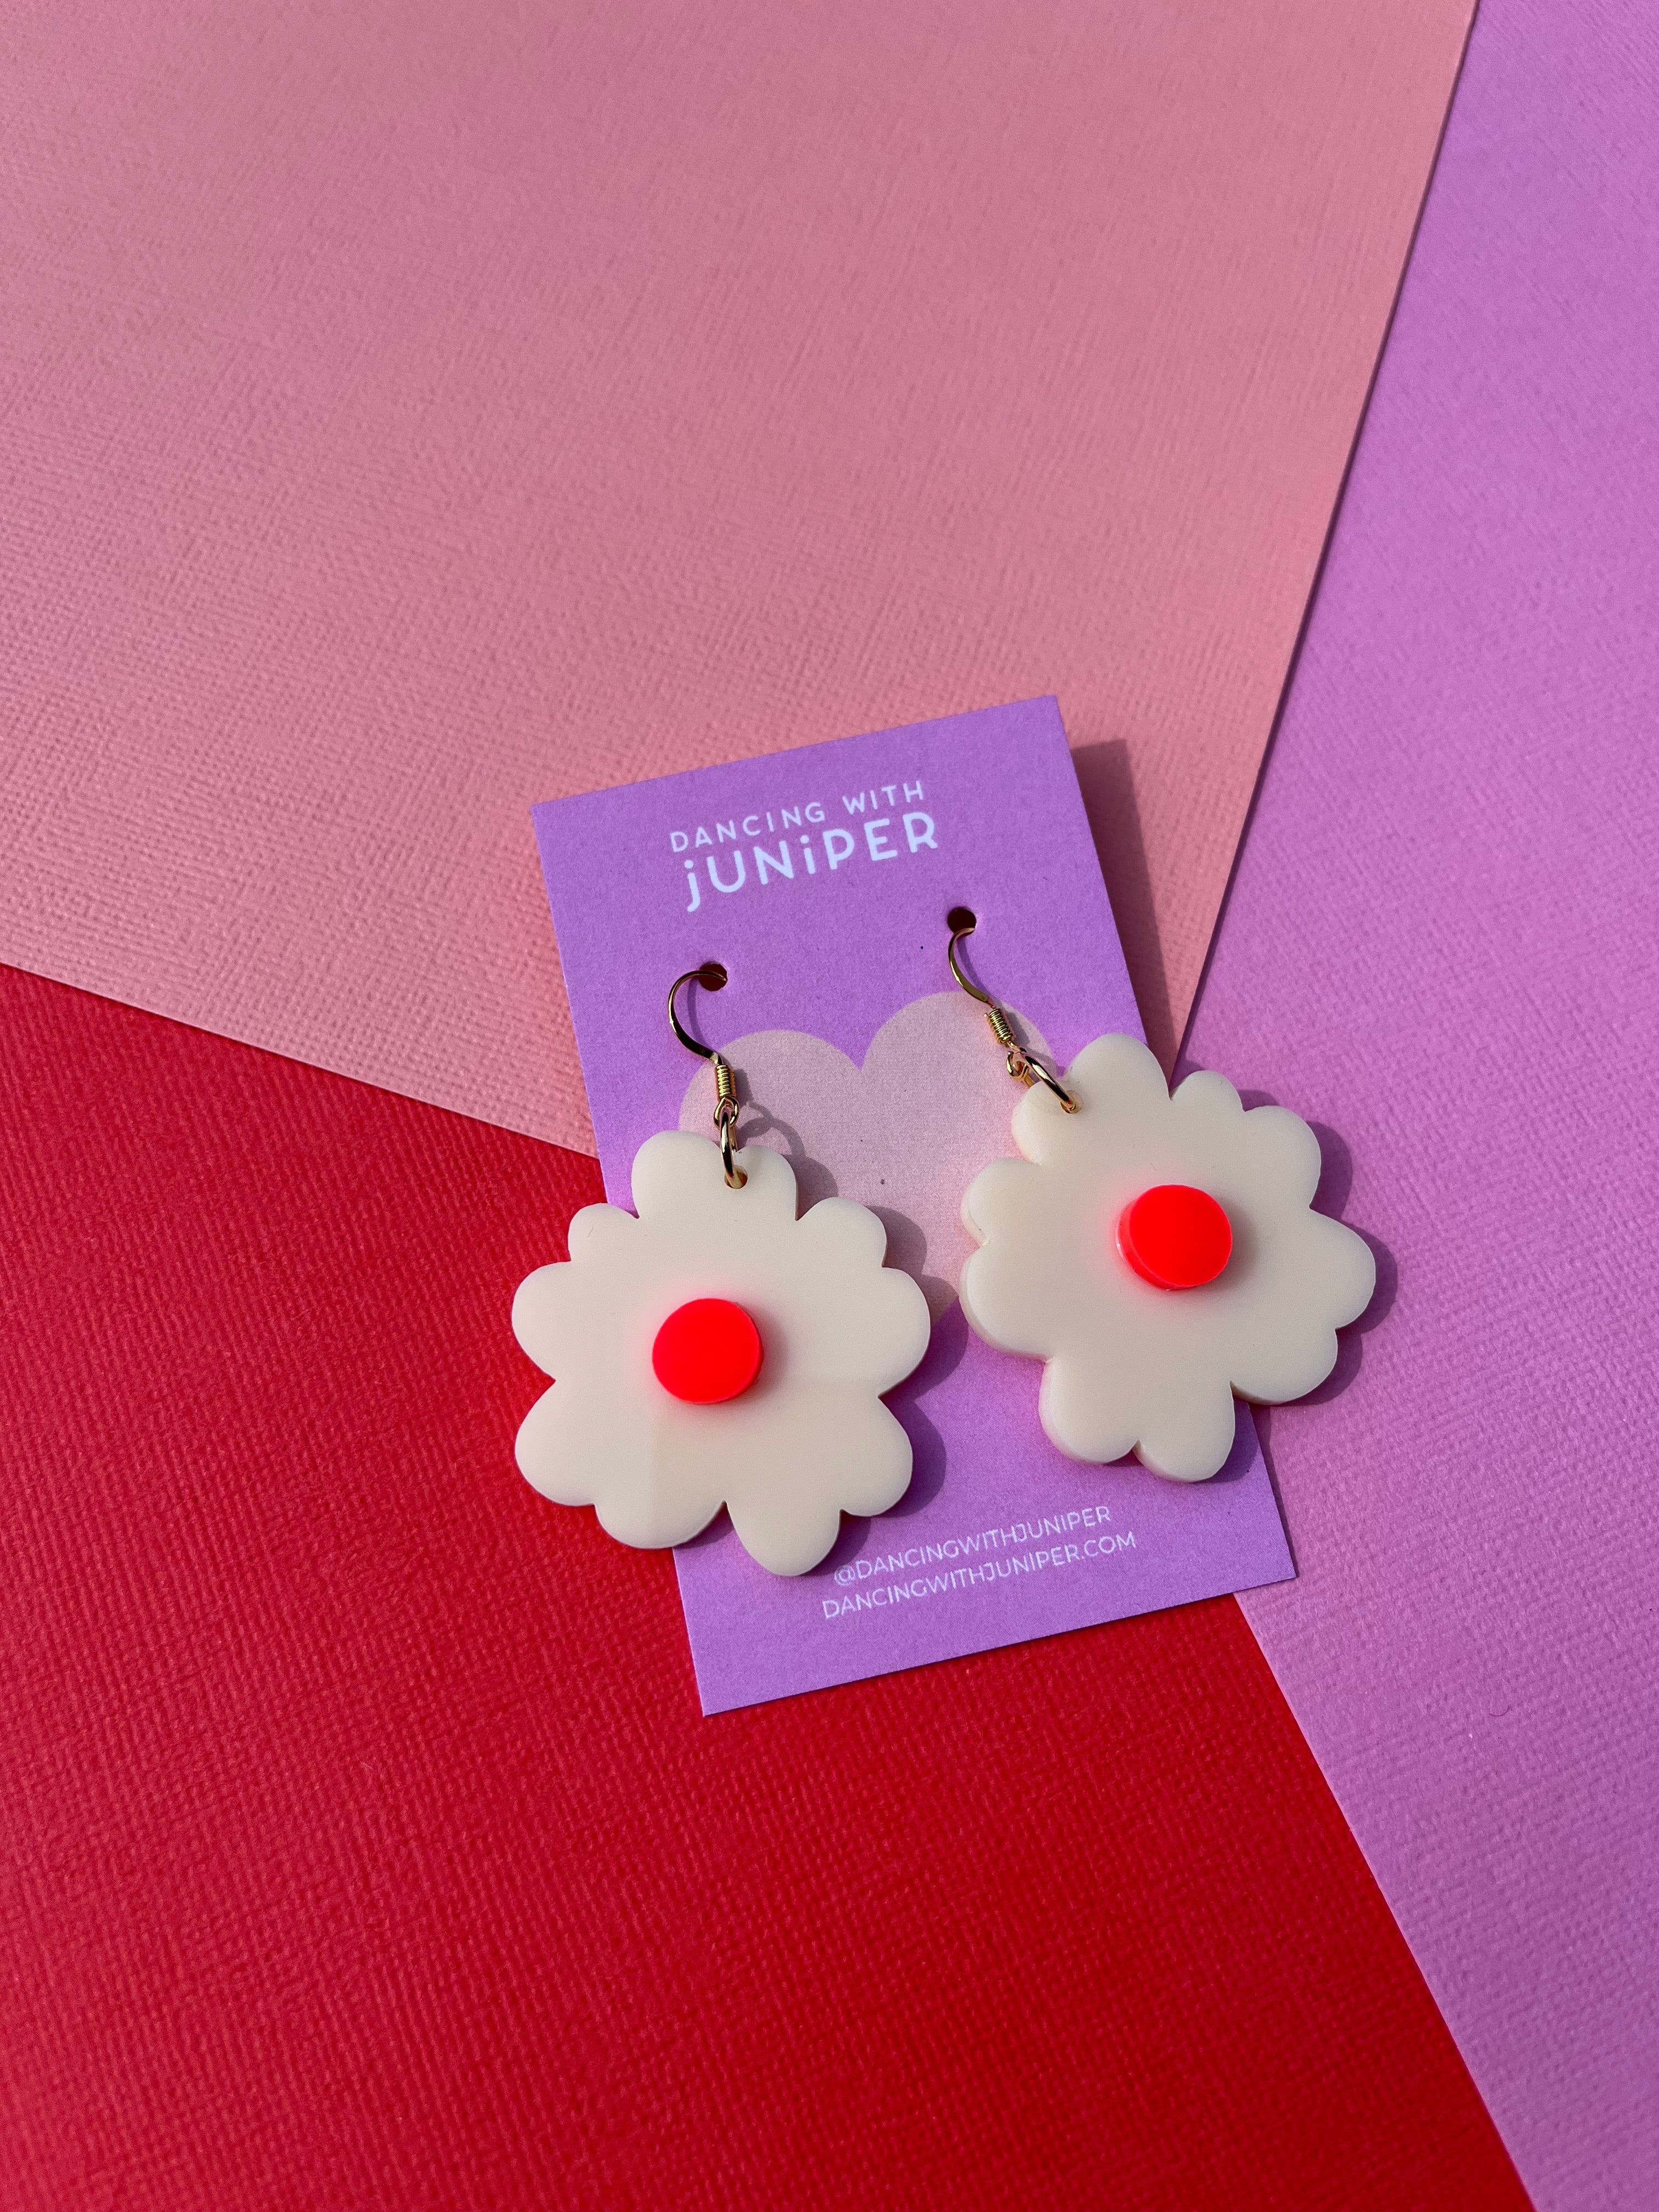 Fancy Floral Dangle: Cream and coral - earrings - Dancing with juniper